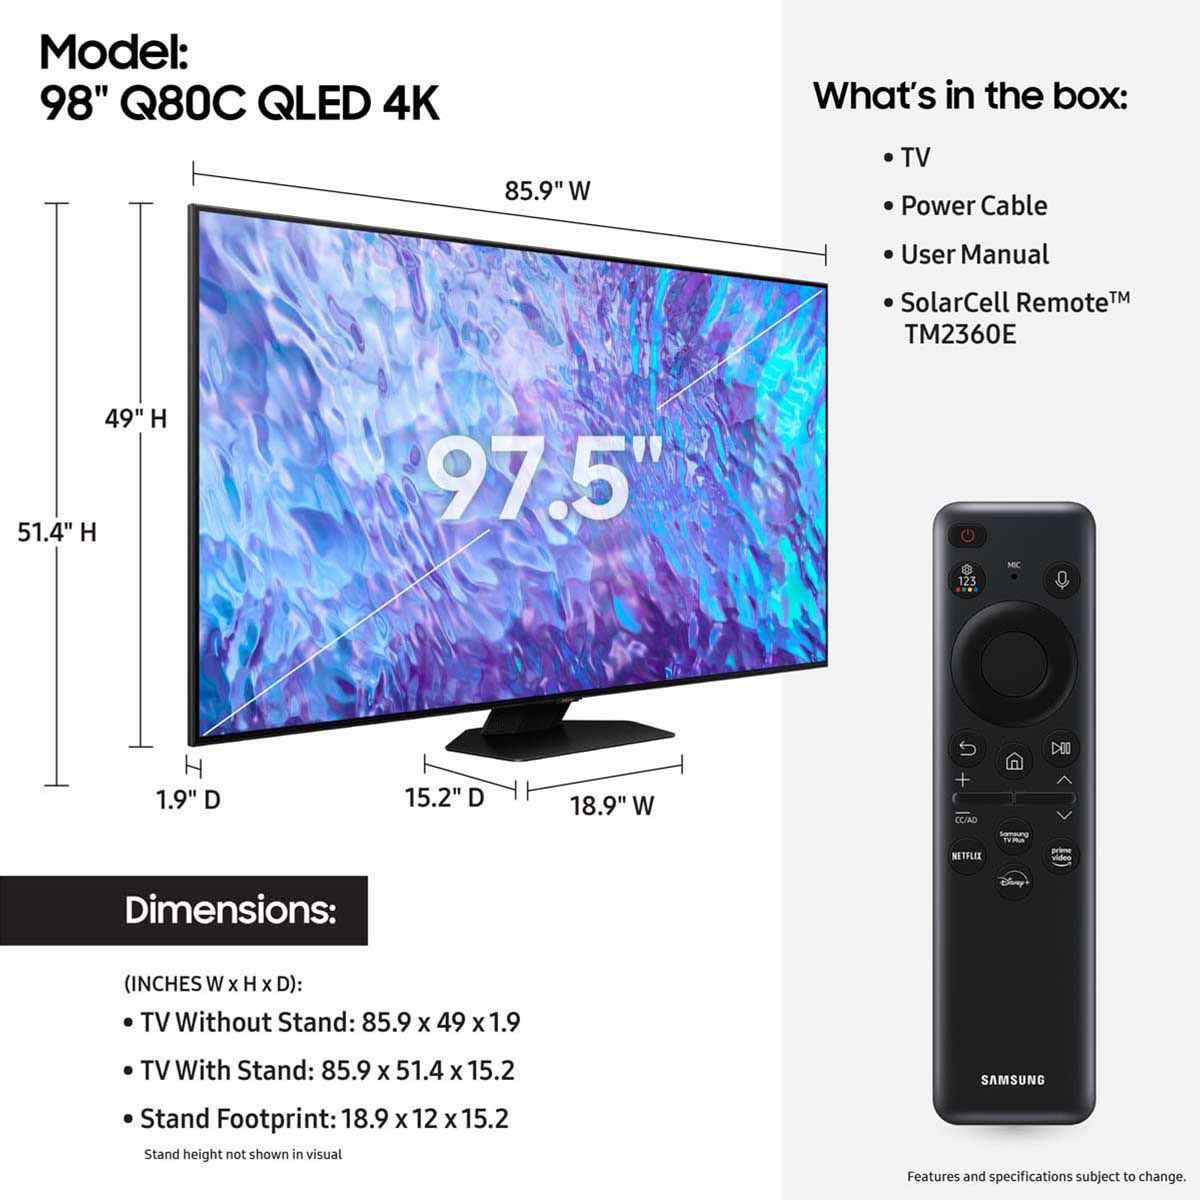 Samsung Q80C QLED 4K Smart TV (2023) - 98" - dimensions and what's in the box